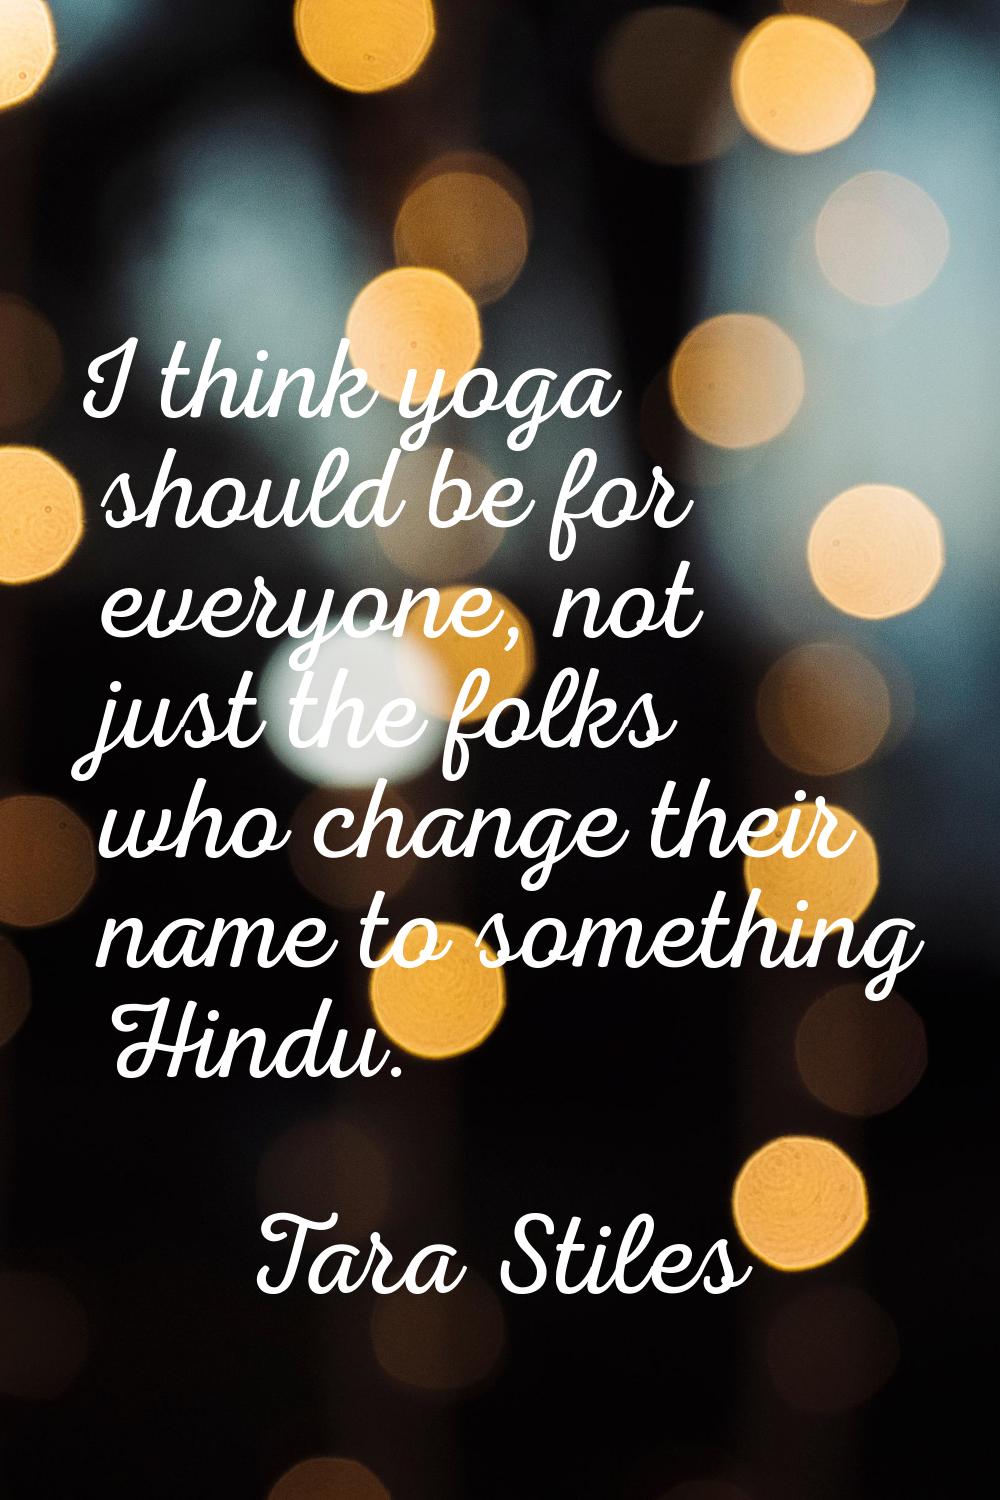 I think yoga should be for everyone, not just the folks who change their name to something Hindu.